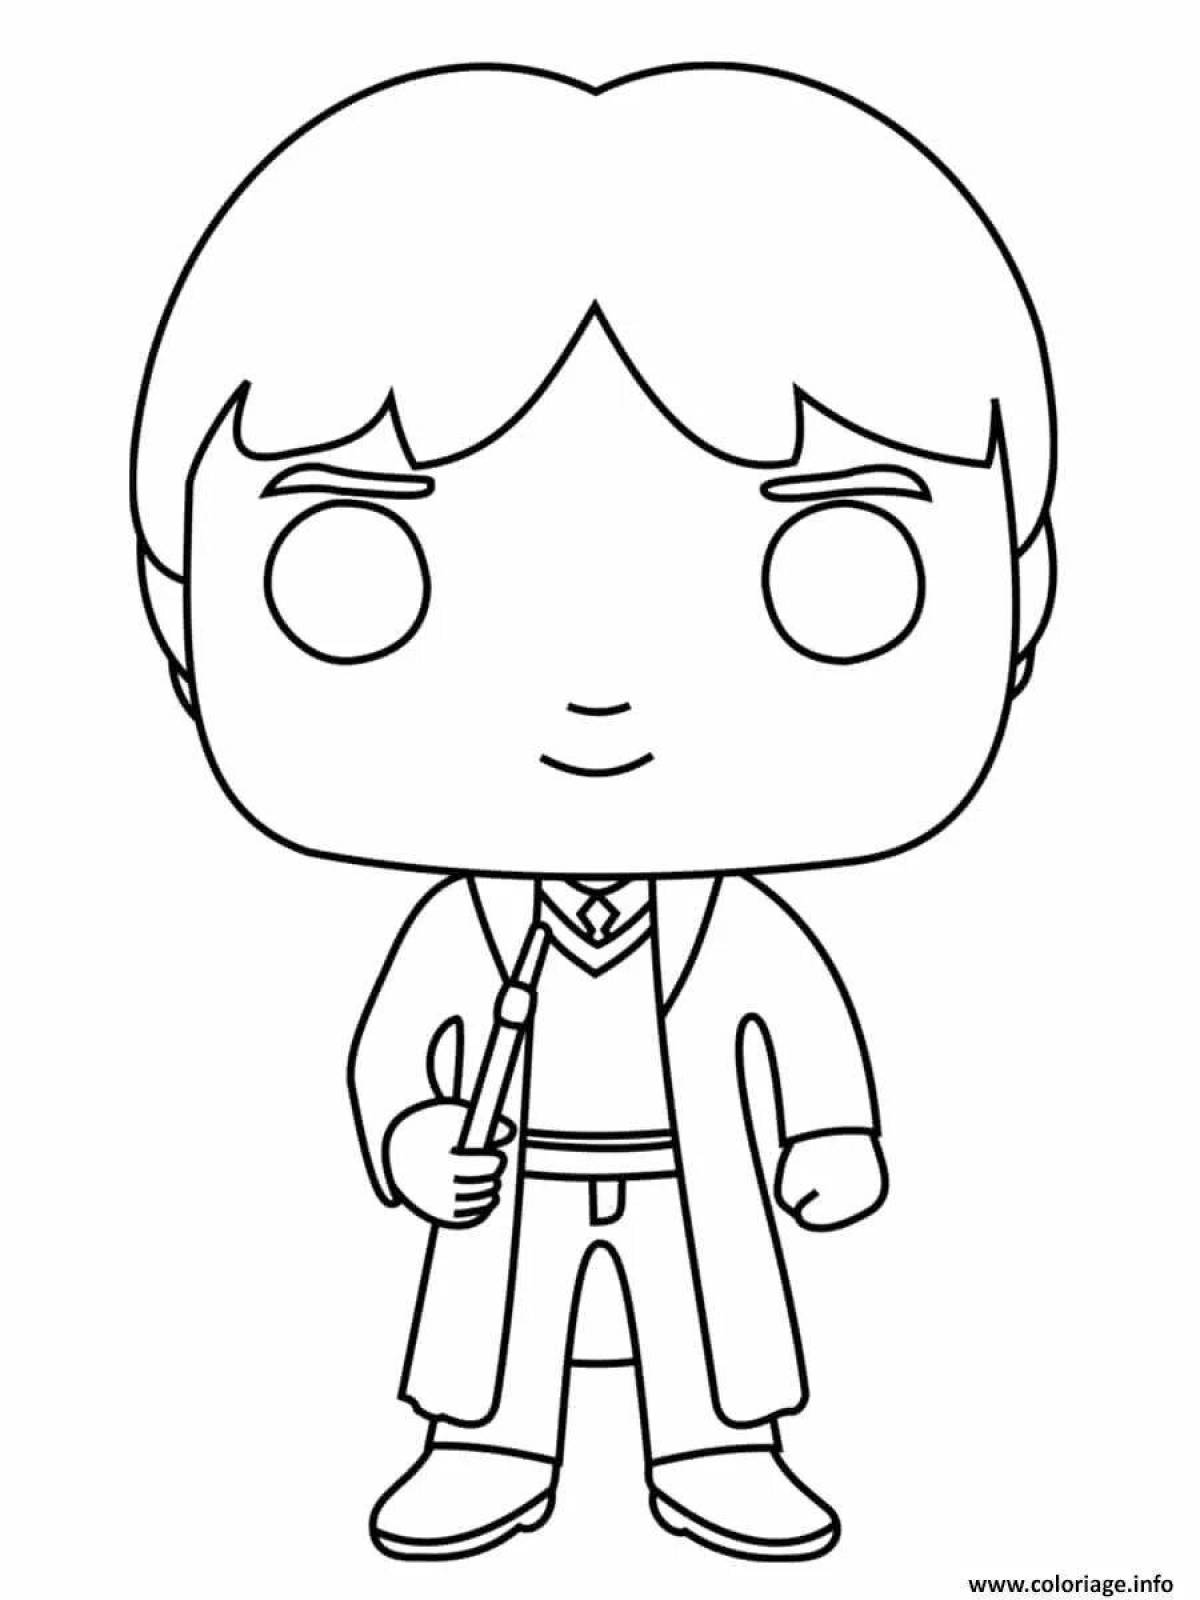 Radiant coloring page ron weasley